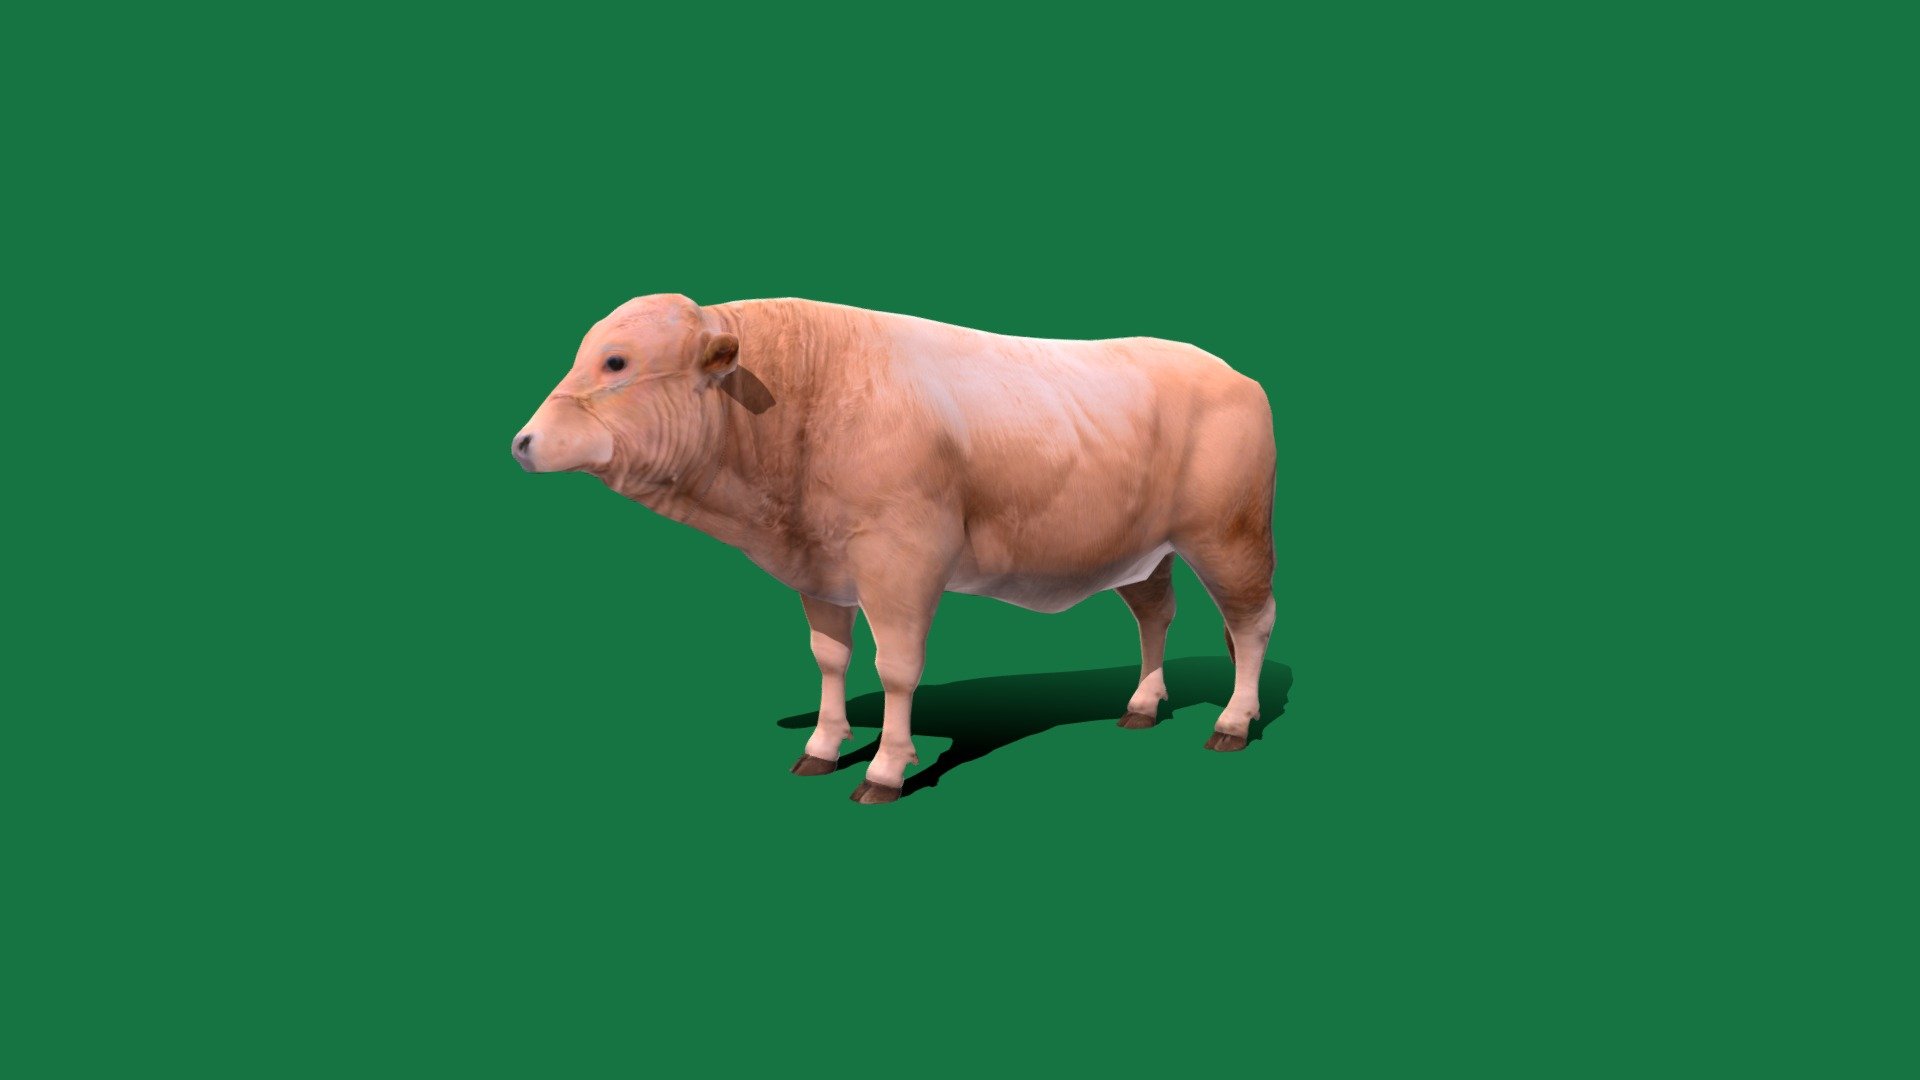 White Bull Mammal (Male Cattle) Domesticated Bovine,Livestock,Farm Animals

Bos Taurus Animal Mammal(Bull)Pet,Cute,Spring Animals

1 Draw Calls

LowPoly

Game Ready (Character)

Subdivision Surface Ready

12 - Animations 

4K PBR Textures 1 Material

Unreal/Unity FBX 

Blend File 3.6.5 LTS / 4 Plus

USDZ File (AR Ready). Real Scale Dimension (Xcode ,Reality Composer, Keynote Ready)

Textures Files

GLB File (Unreal 5.1 Plus Native Support,Gadot)


Gltf File ( Spark AR, Lens Studio(SnapChat) , Effector(Tiktok) , Spline, Play Canvas,Omiverse ) Compatible




Triangles -5786



Faces -3290

Edges -6199

Vertices -2914

Diffuse, Metallic, Roughness , Normal Map ,Specular Map,AO


Cattle are large, domesticated, bovid ungulates widely kept as livestock. They are prominent modern members of the subfamily Bovinae and the most widespread species of the genus Bos. Mature female cattle are called cows and mature male cattle are bulls 3d model